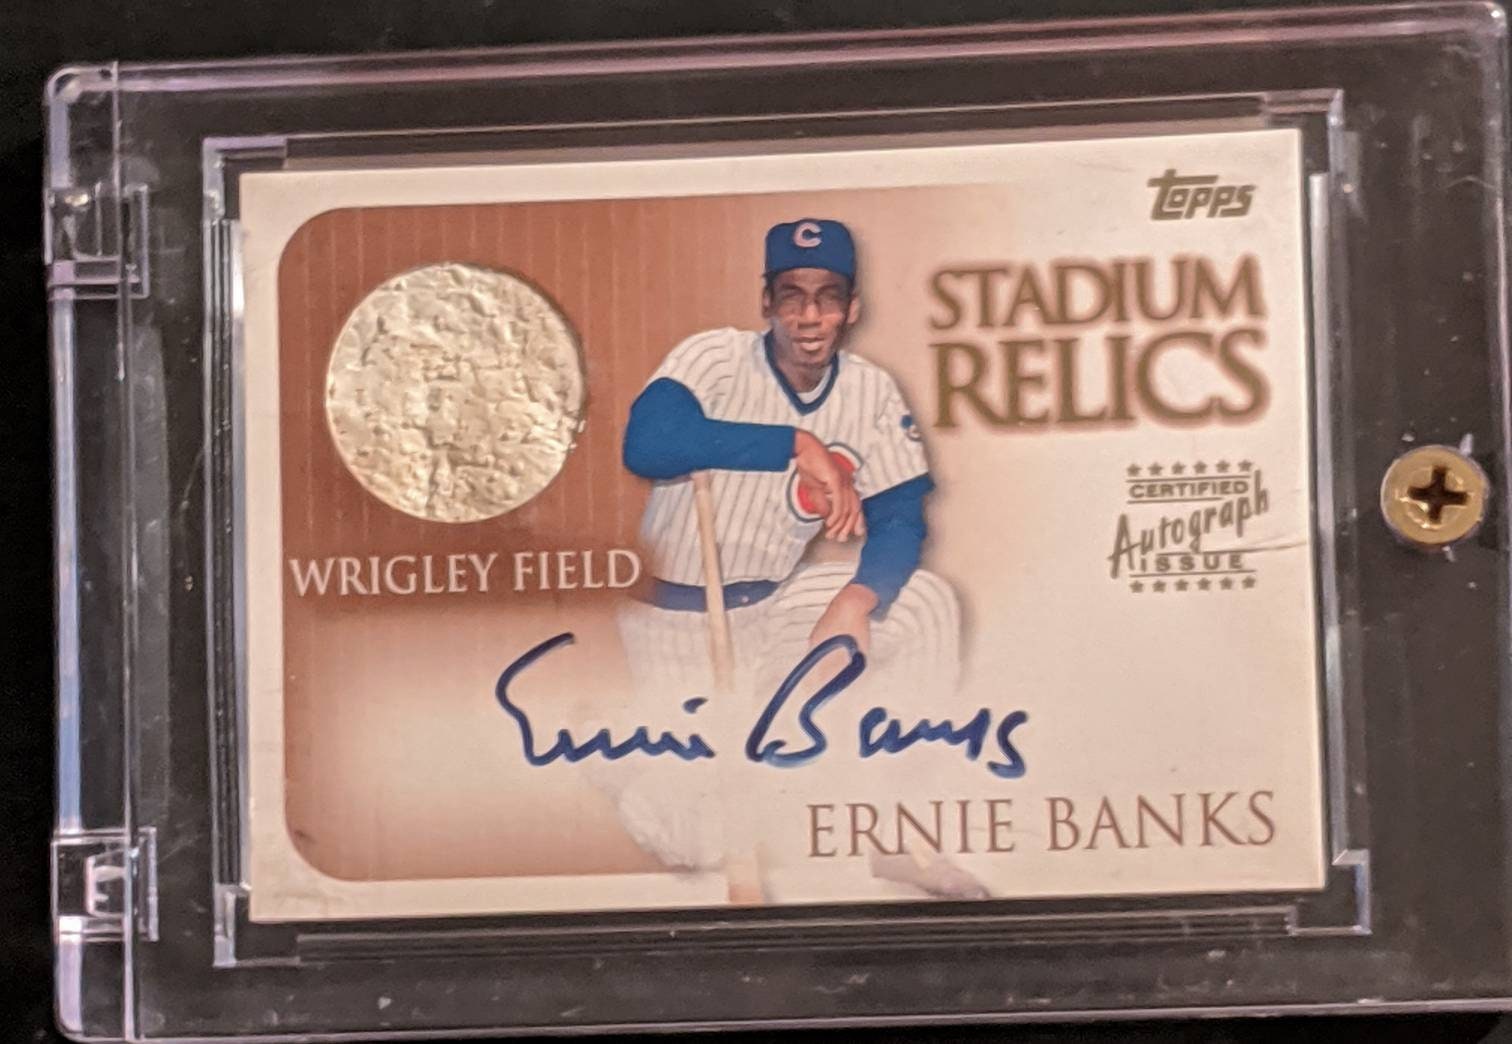 Authentic Ernie Banks Autograph and Wrigley Field Relic 